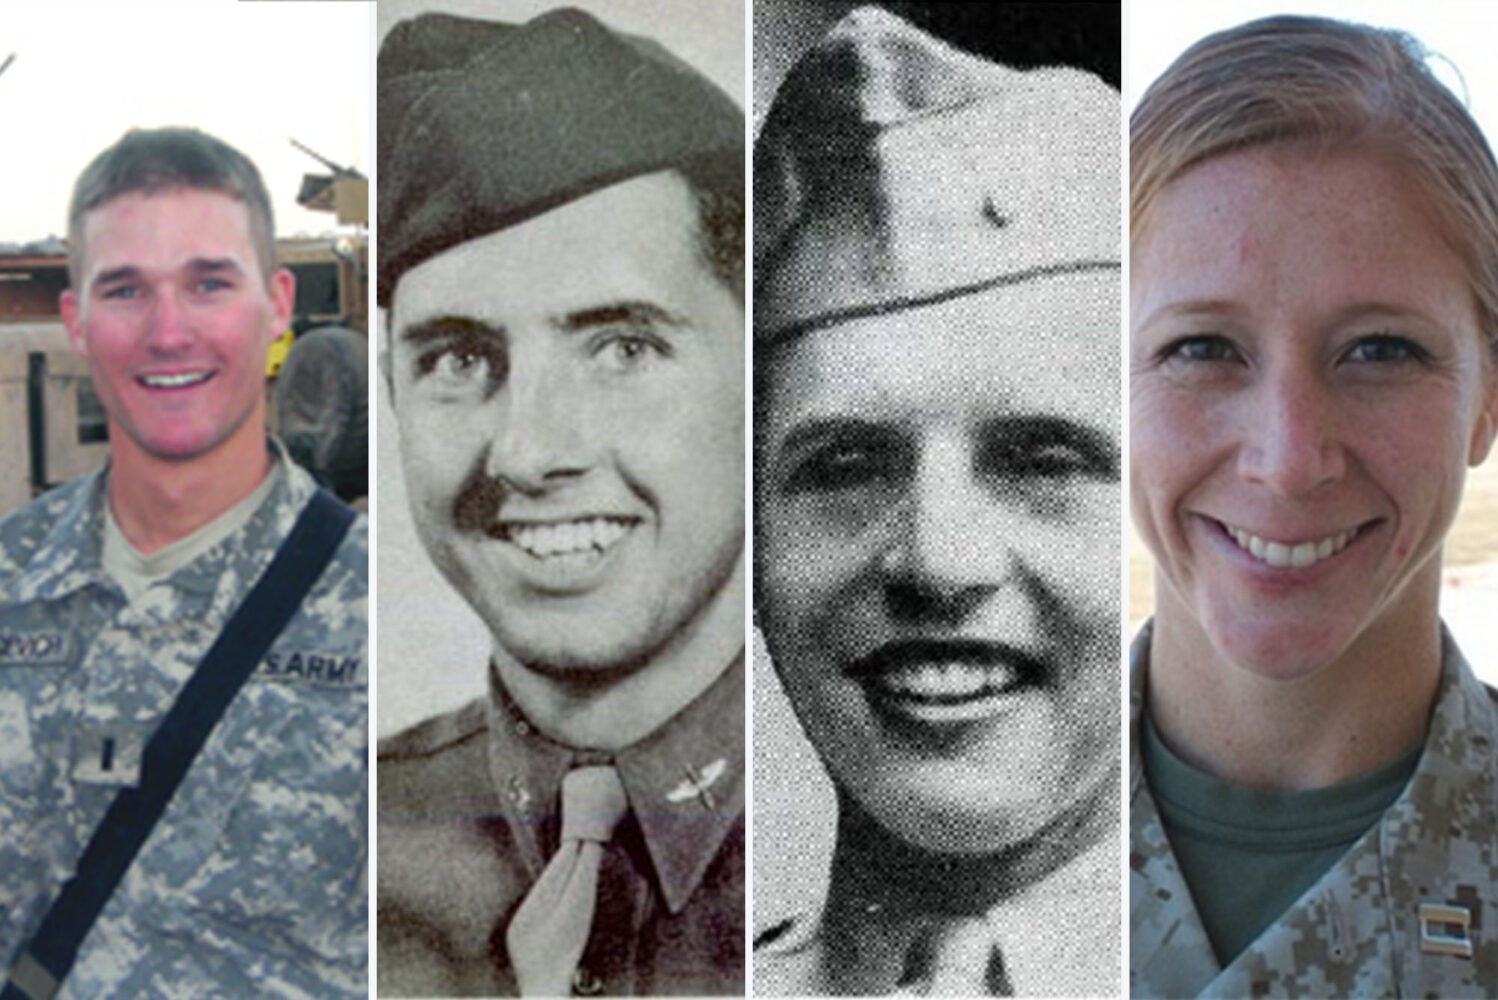 Photo: Composite image of four individuals who served in the army. They all smile in their respective uniforms.